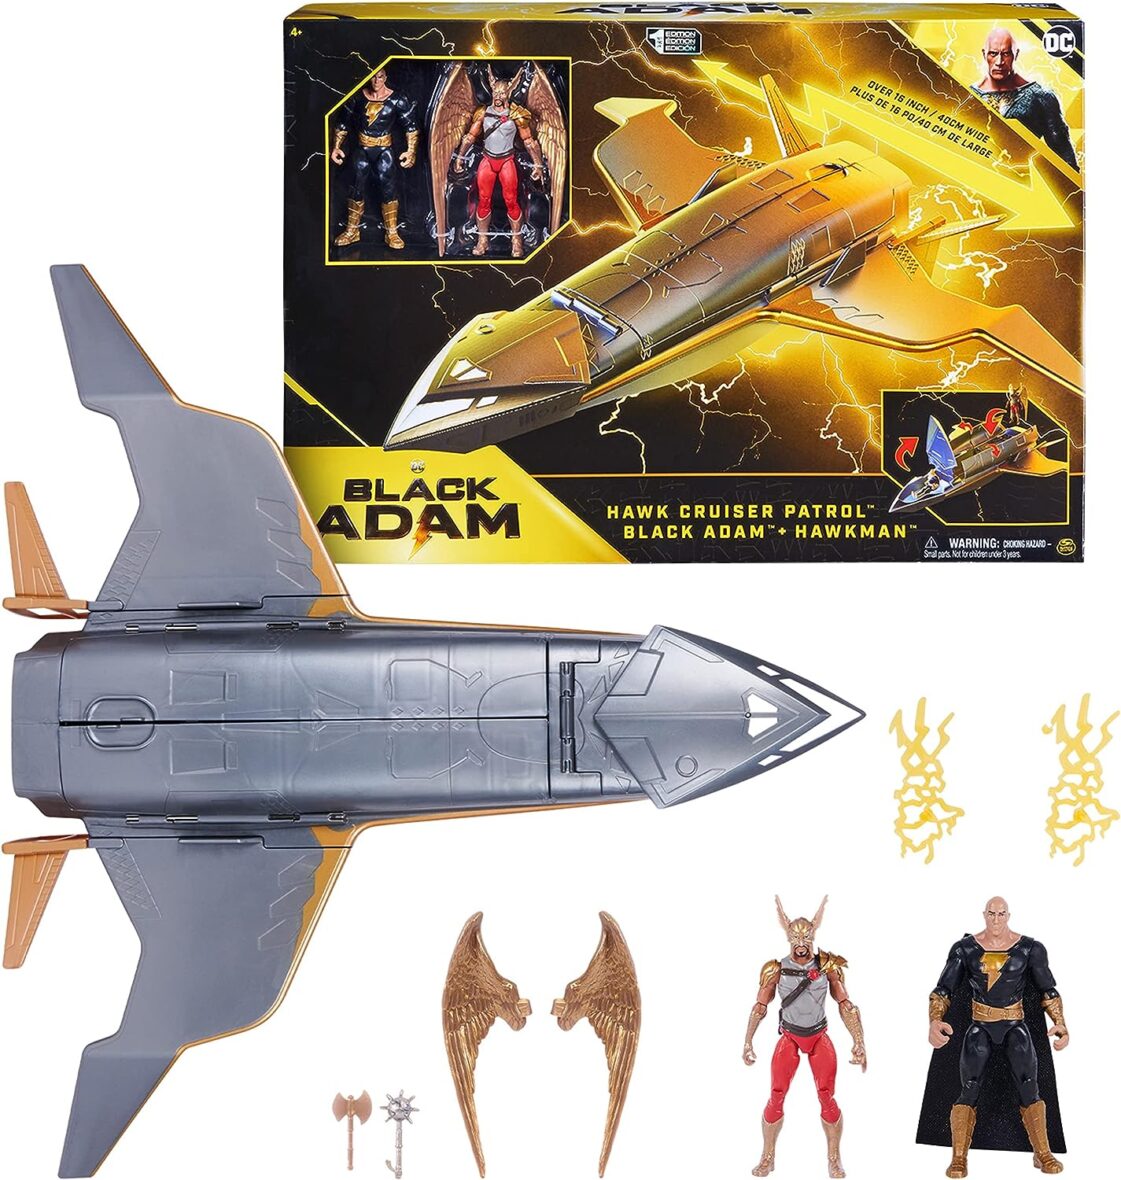 DC Comics, Hawk Cruiser Patrol, Includes Black Adam and Hawkman Action Figures, Over 16-inch Wide, First Edition, Super Hero Kids Toys for Boys and Girls Aged 4 and up